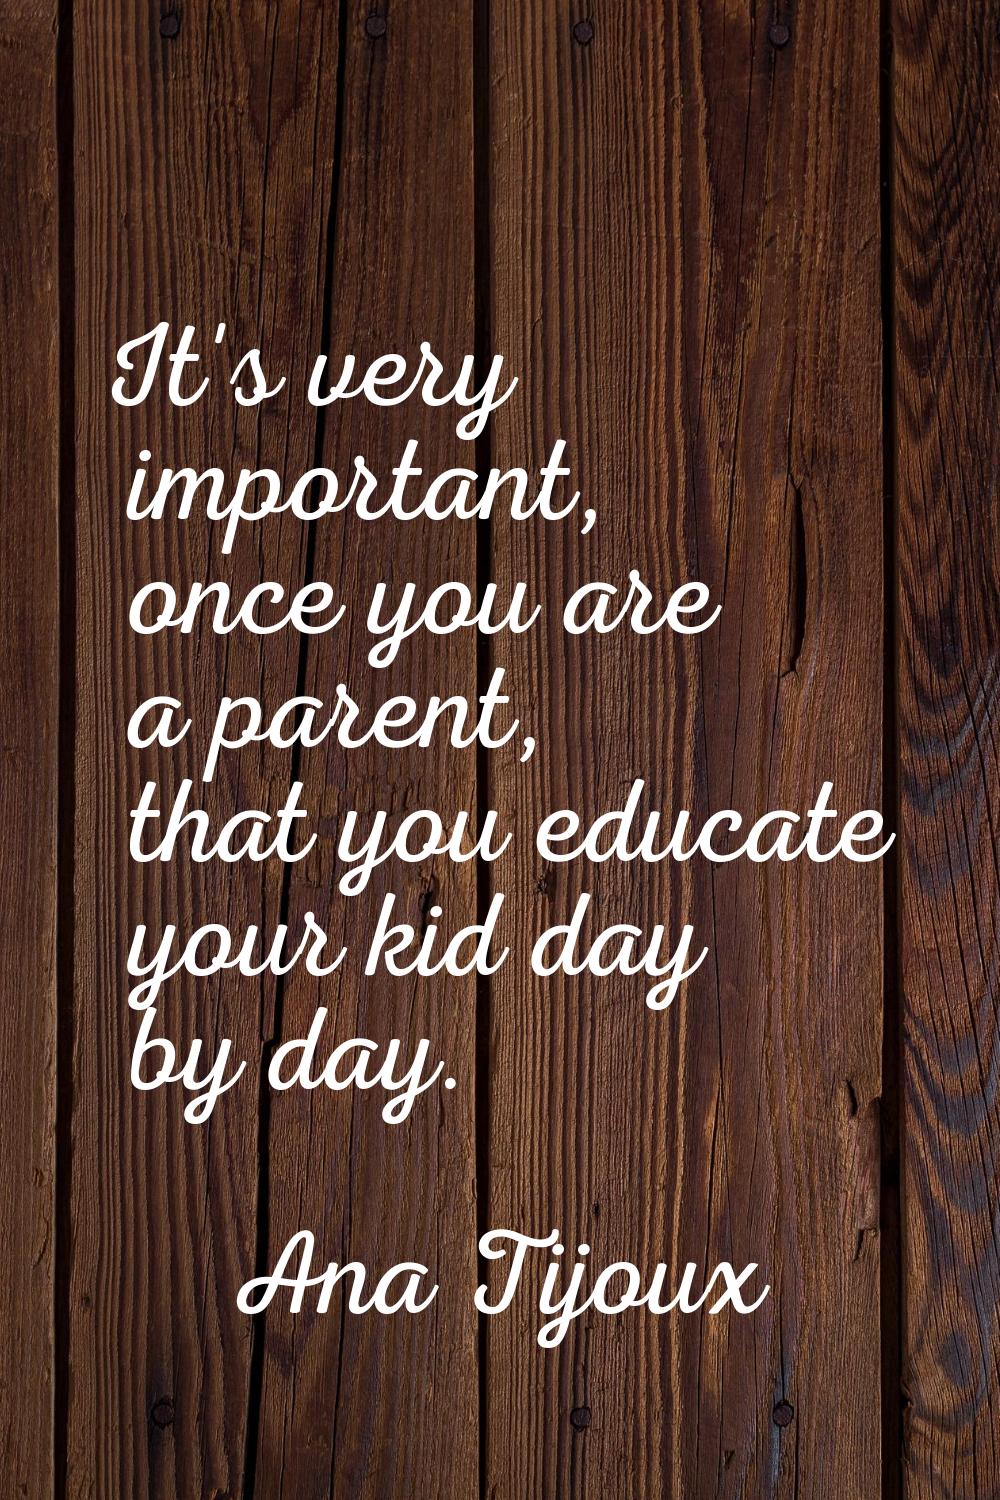 It's very important, once you are a parent, that you educate your kid day by day.